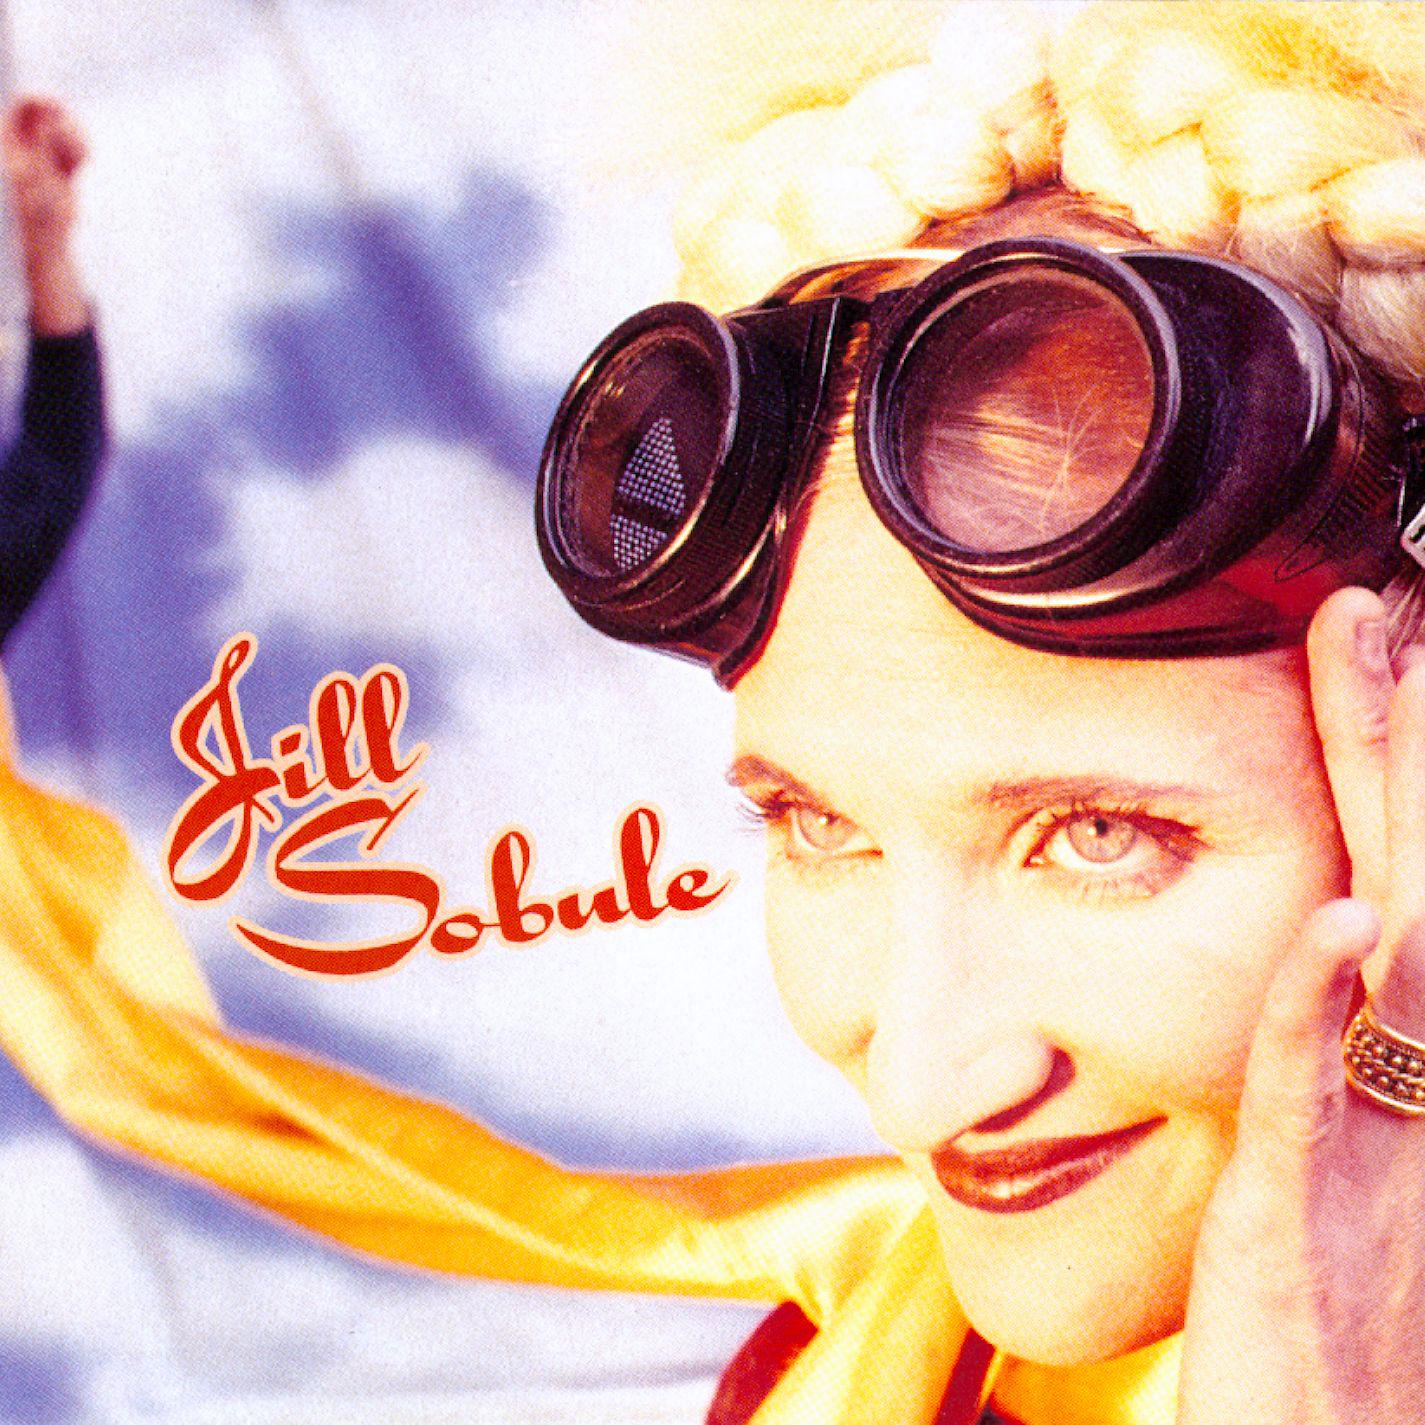 Jill Sobule - (Theme From) The Girl in the Affair